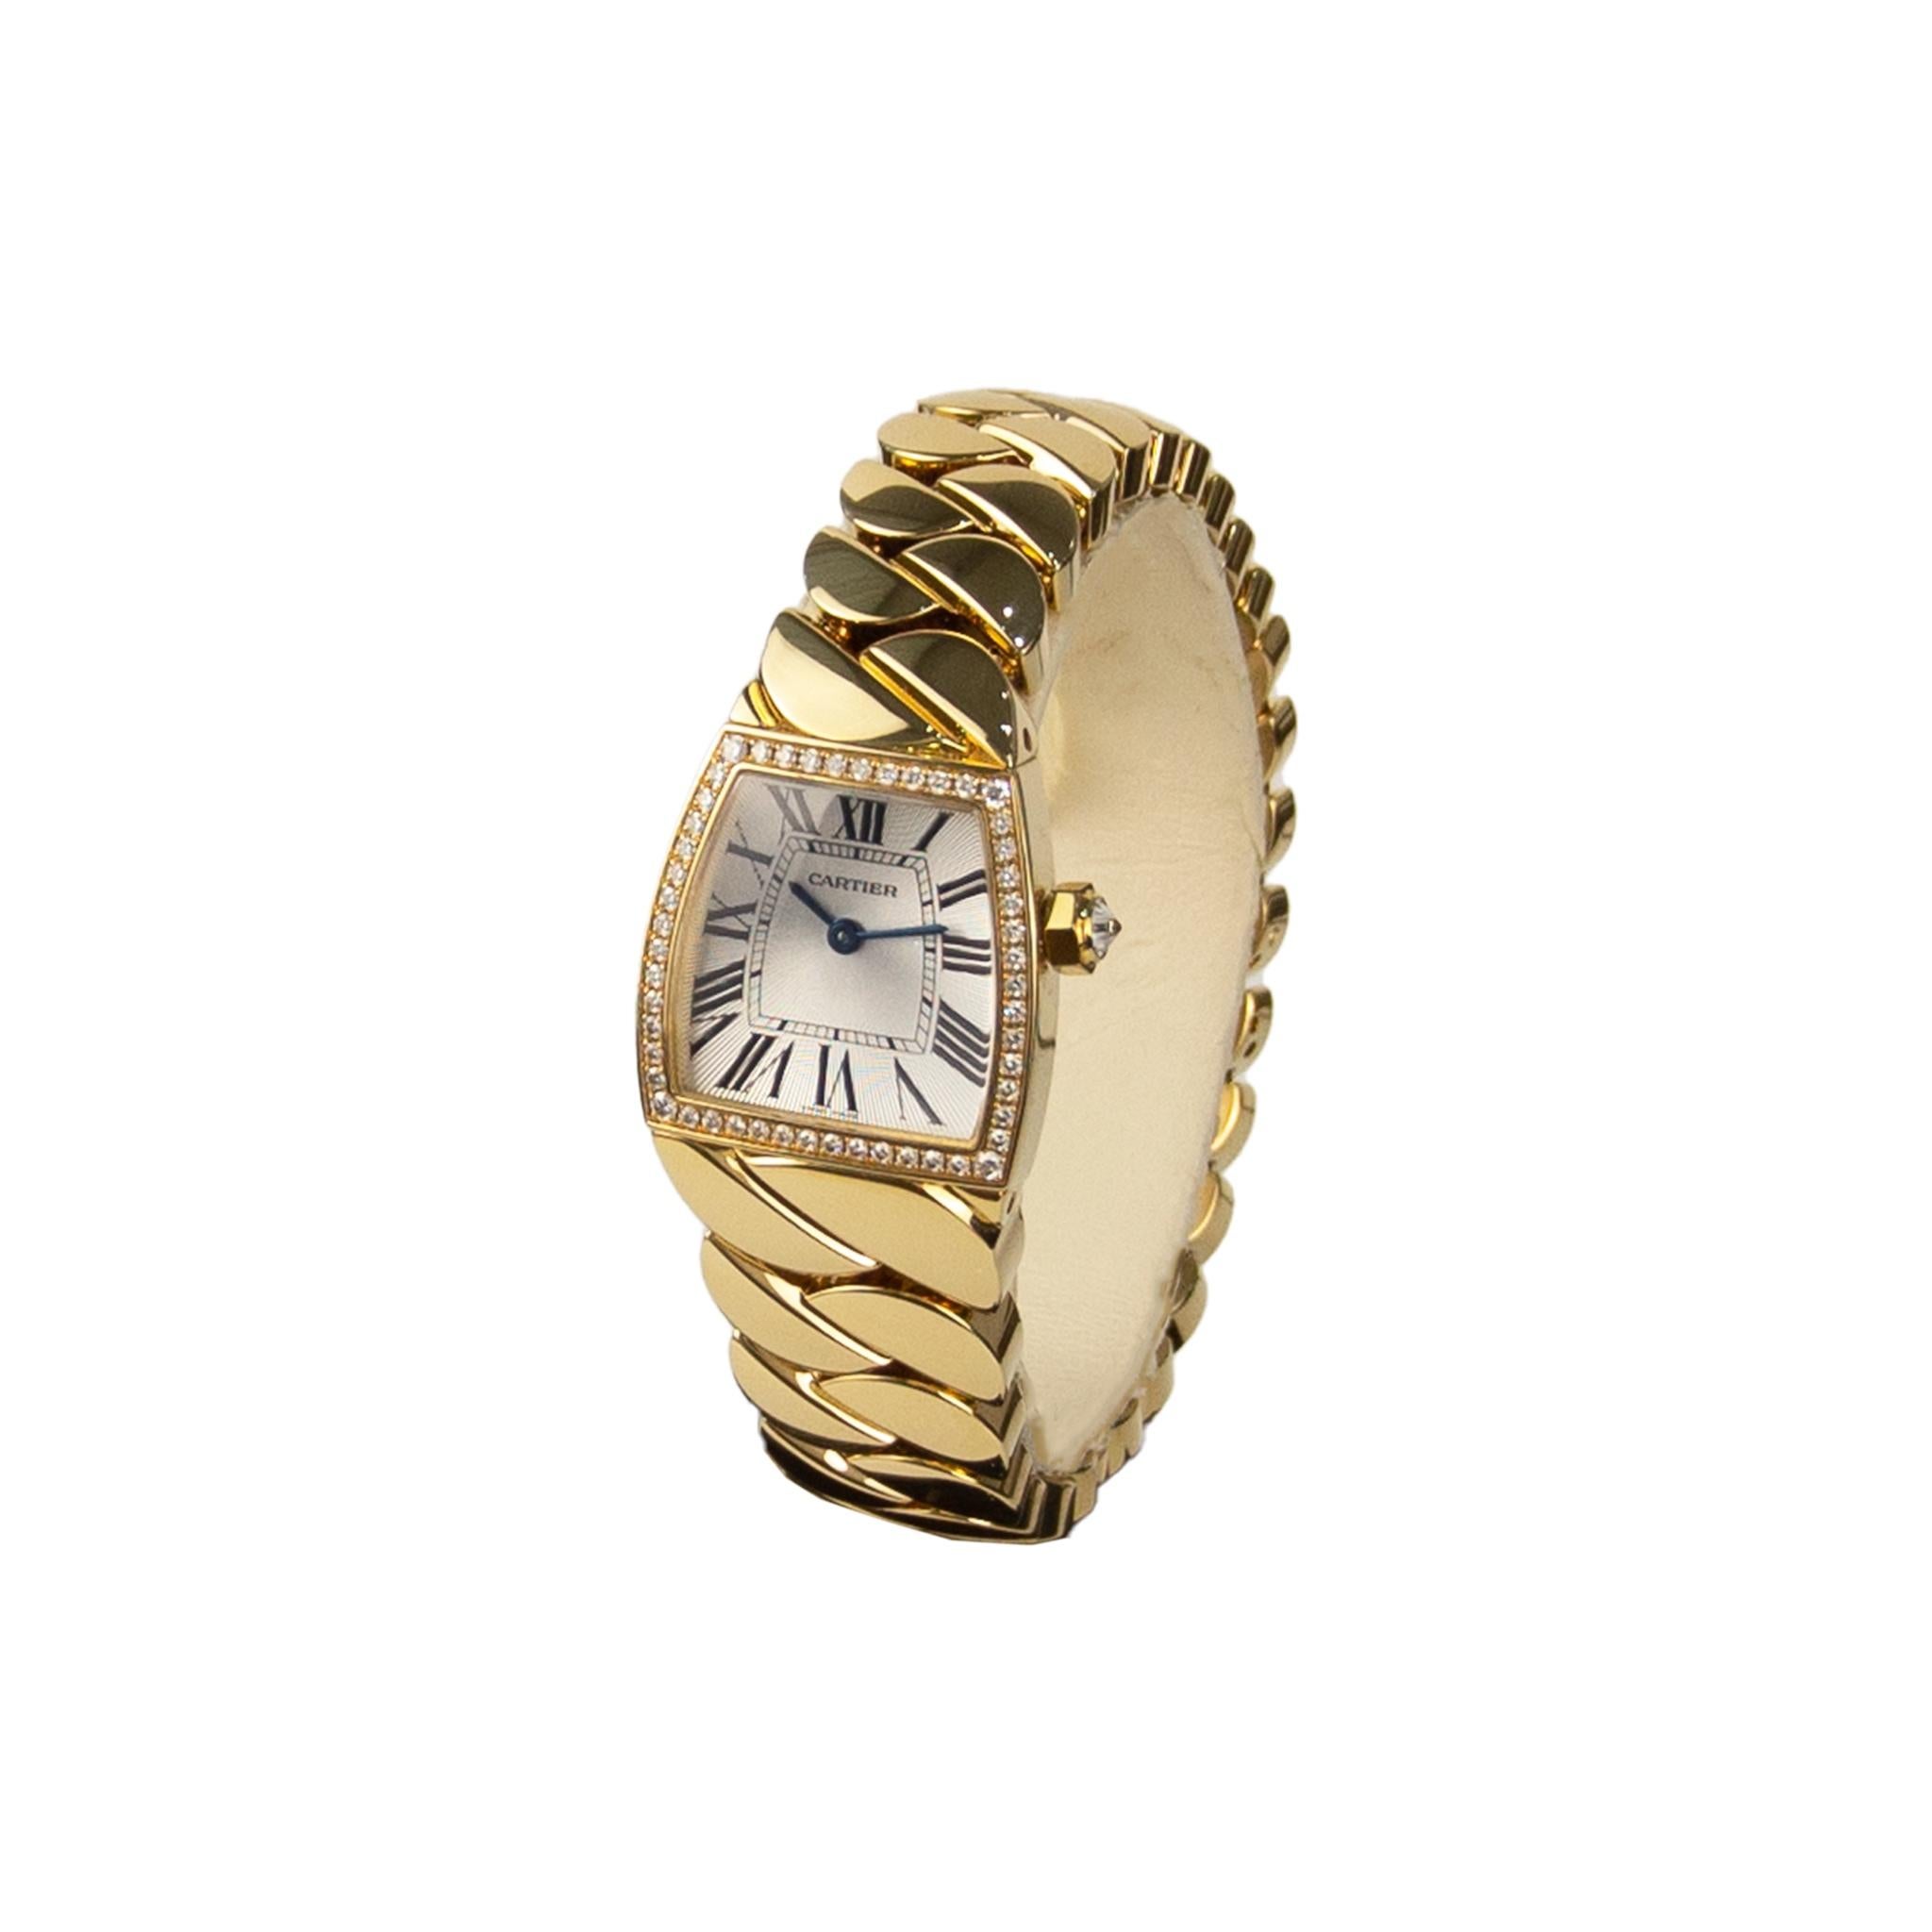 Brand: Cartier
Model: La Dona de Cartier
Reference number: WE60040H
Movement: Automatic
Case Material: Yellow Gold
Bracelet Material: Yellow Gold
Case diameter: 22mm
Water resistance: No water resistance
Crystal: Sapphire Crystal
Dial color: